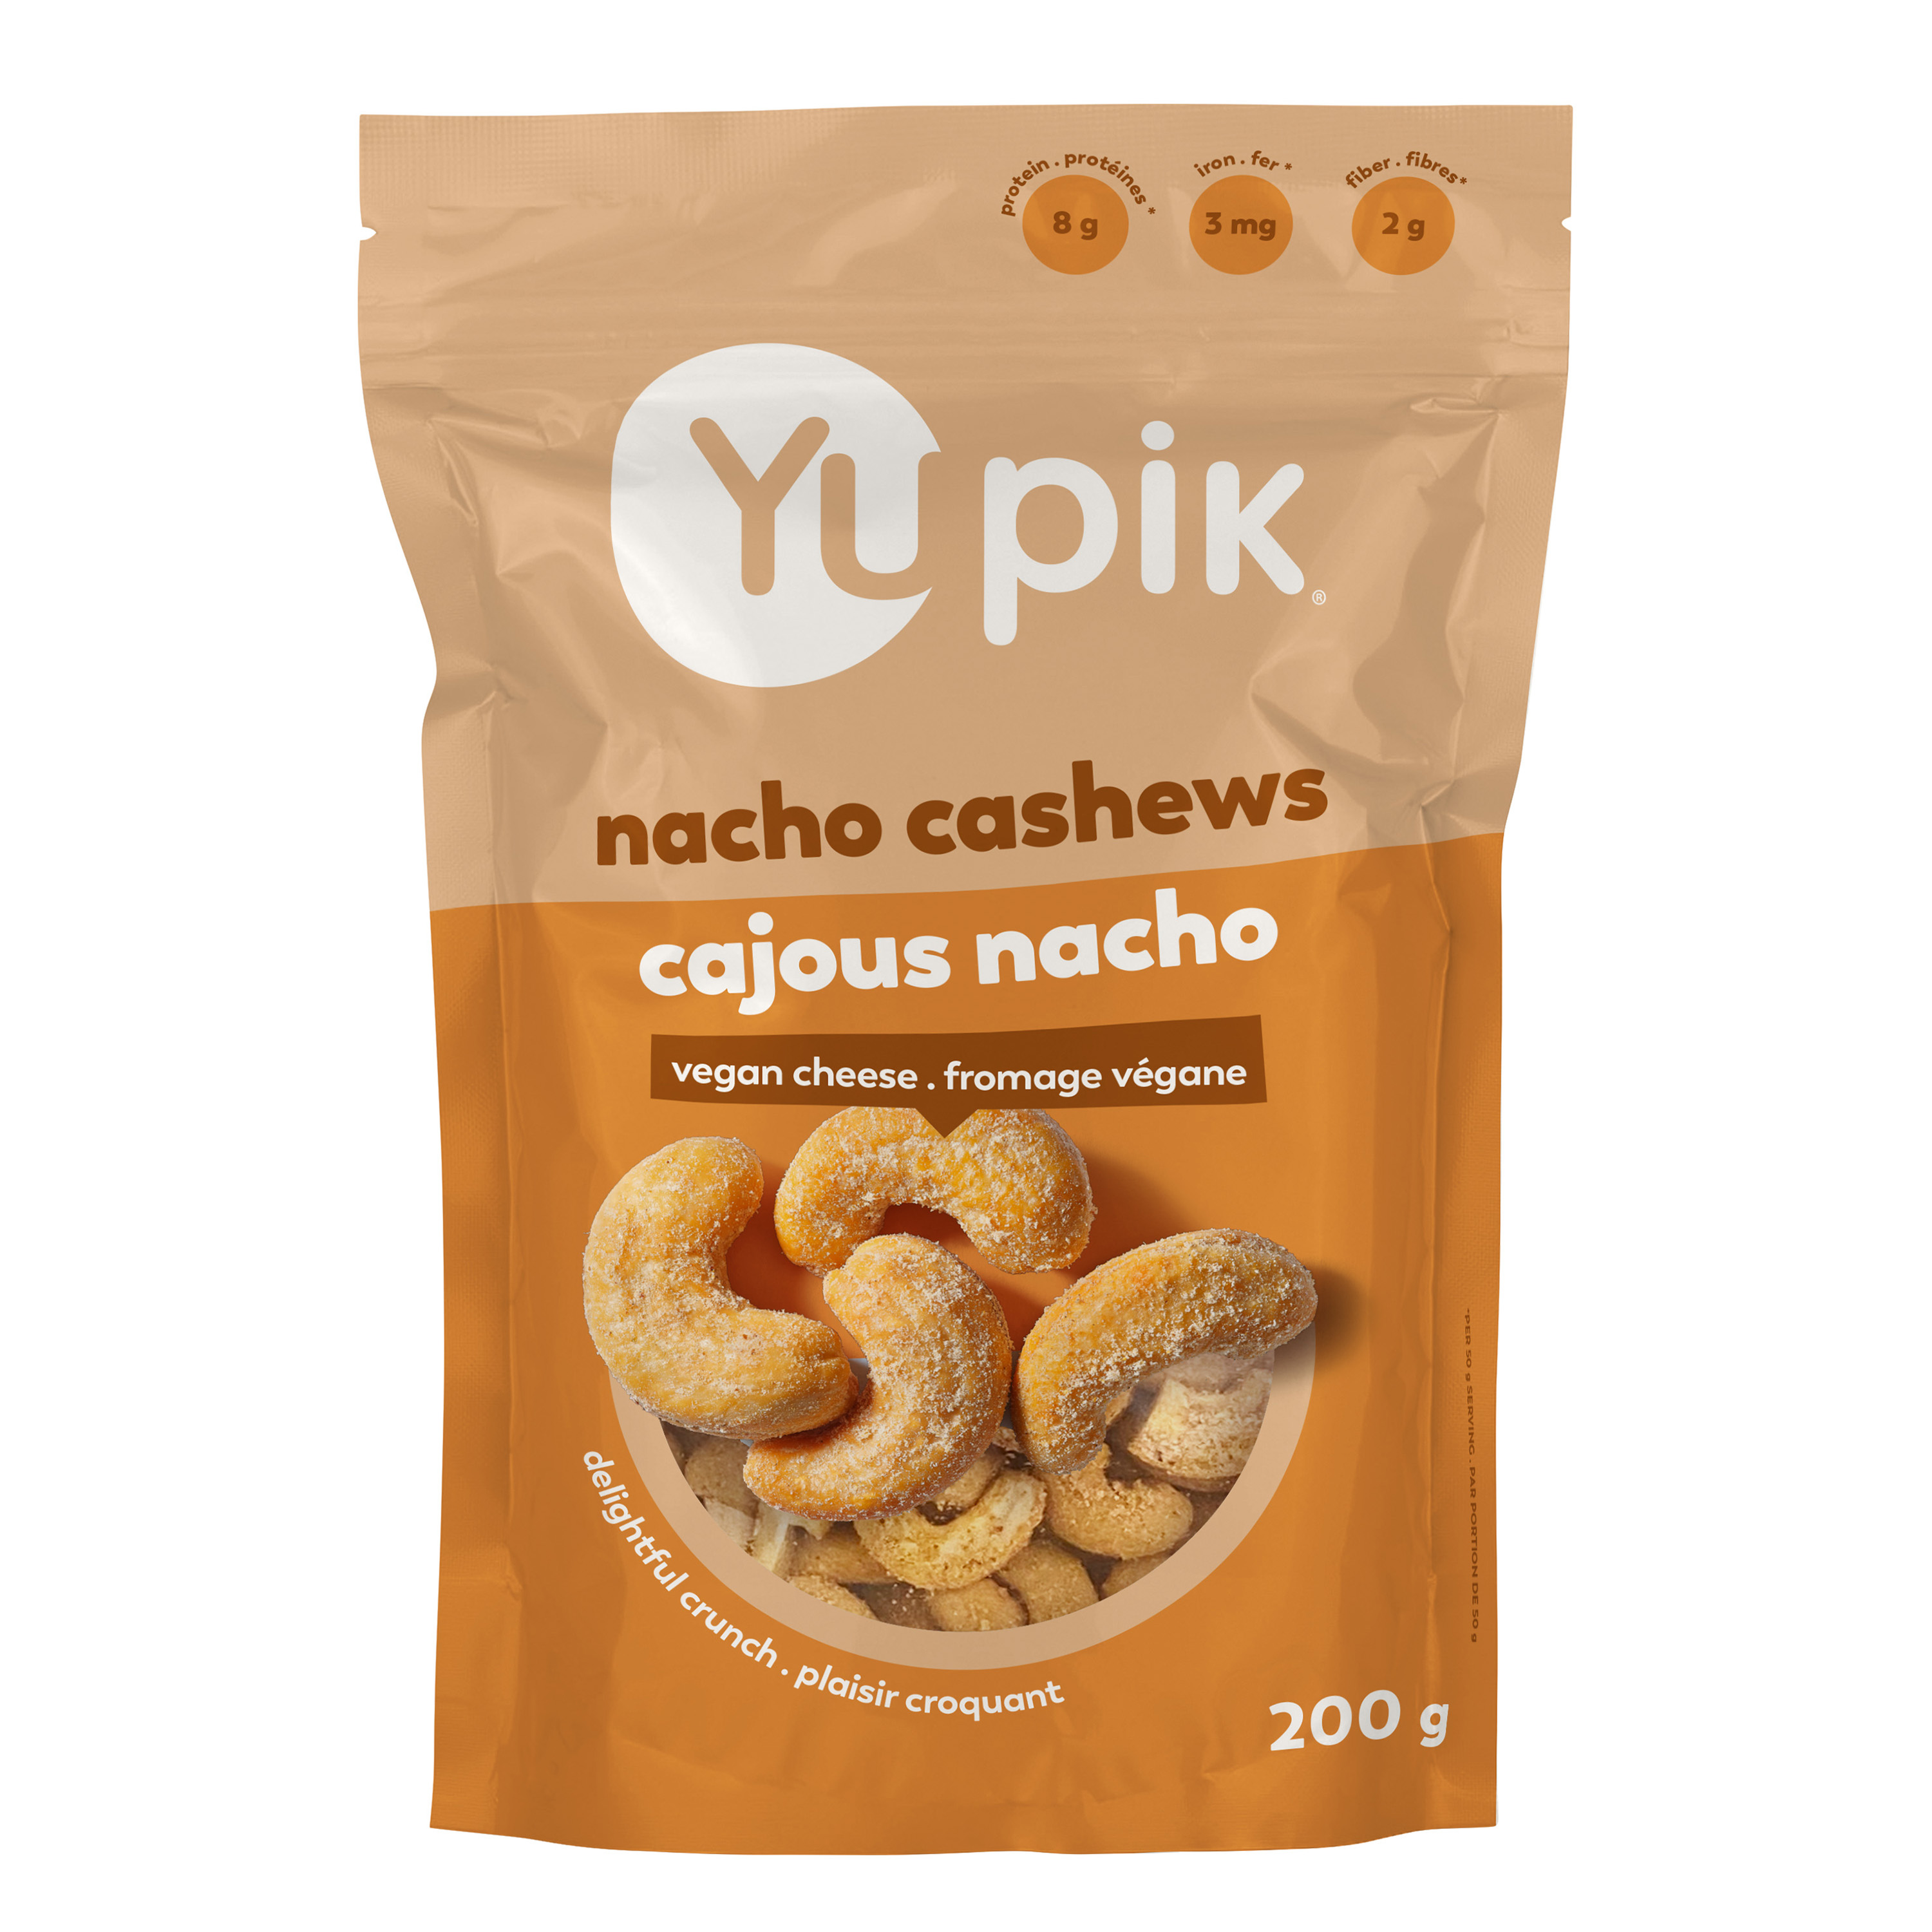 Roasted Cashews, Seasoning (maltodextrin, salt, onion powder, yeast extract, natural flavor, tomato powder, garlic powder, green bell pepper powder, paprika, dehydrated mushroom, spices, paprika extract, lactic acid, citric acid, white distilled vinegar, jalapeno pepper, silicon dioxide), Non-GMO canola oil.